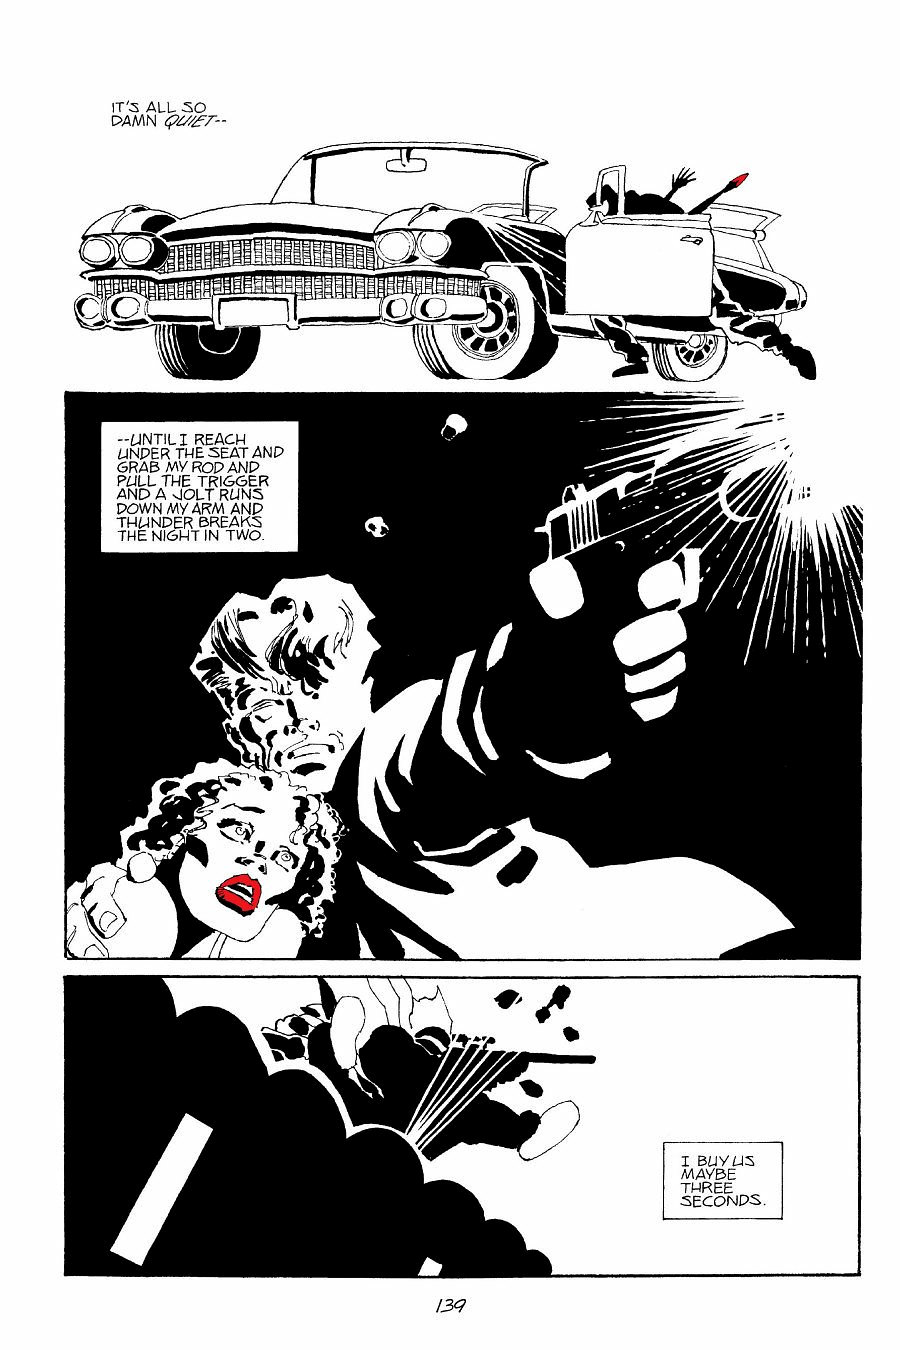 page 139 of sin city 6 booze broads and bullets